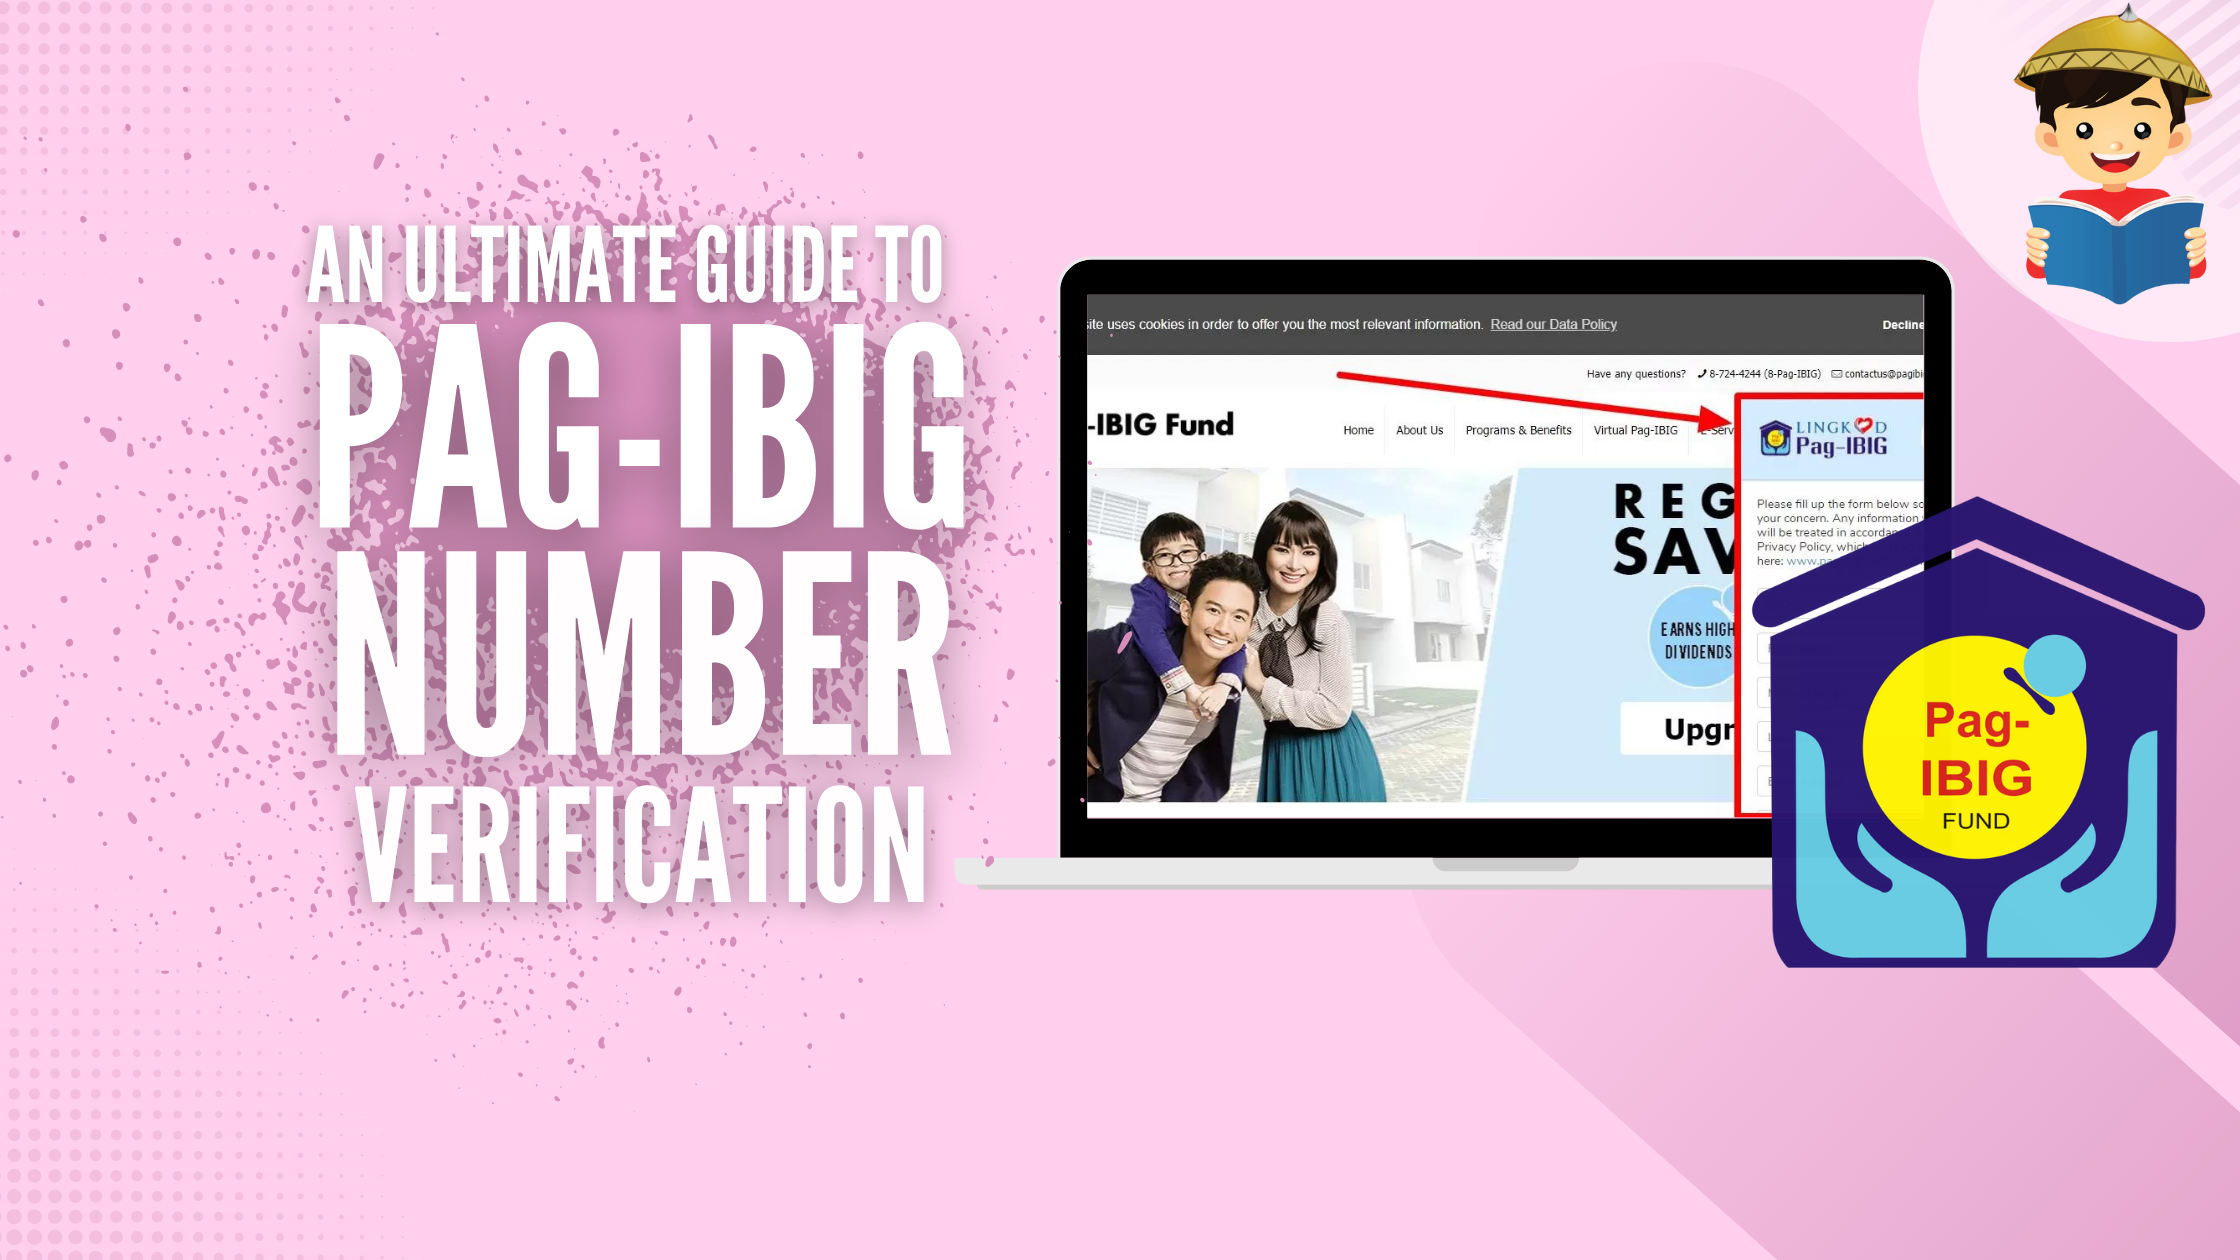 pag ibig mid number verification featured image